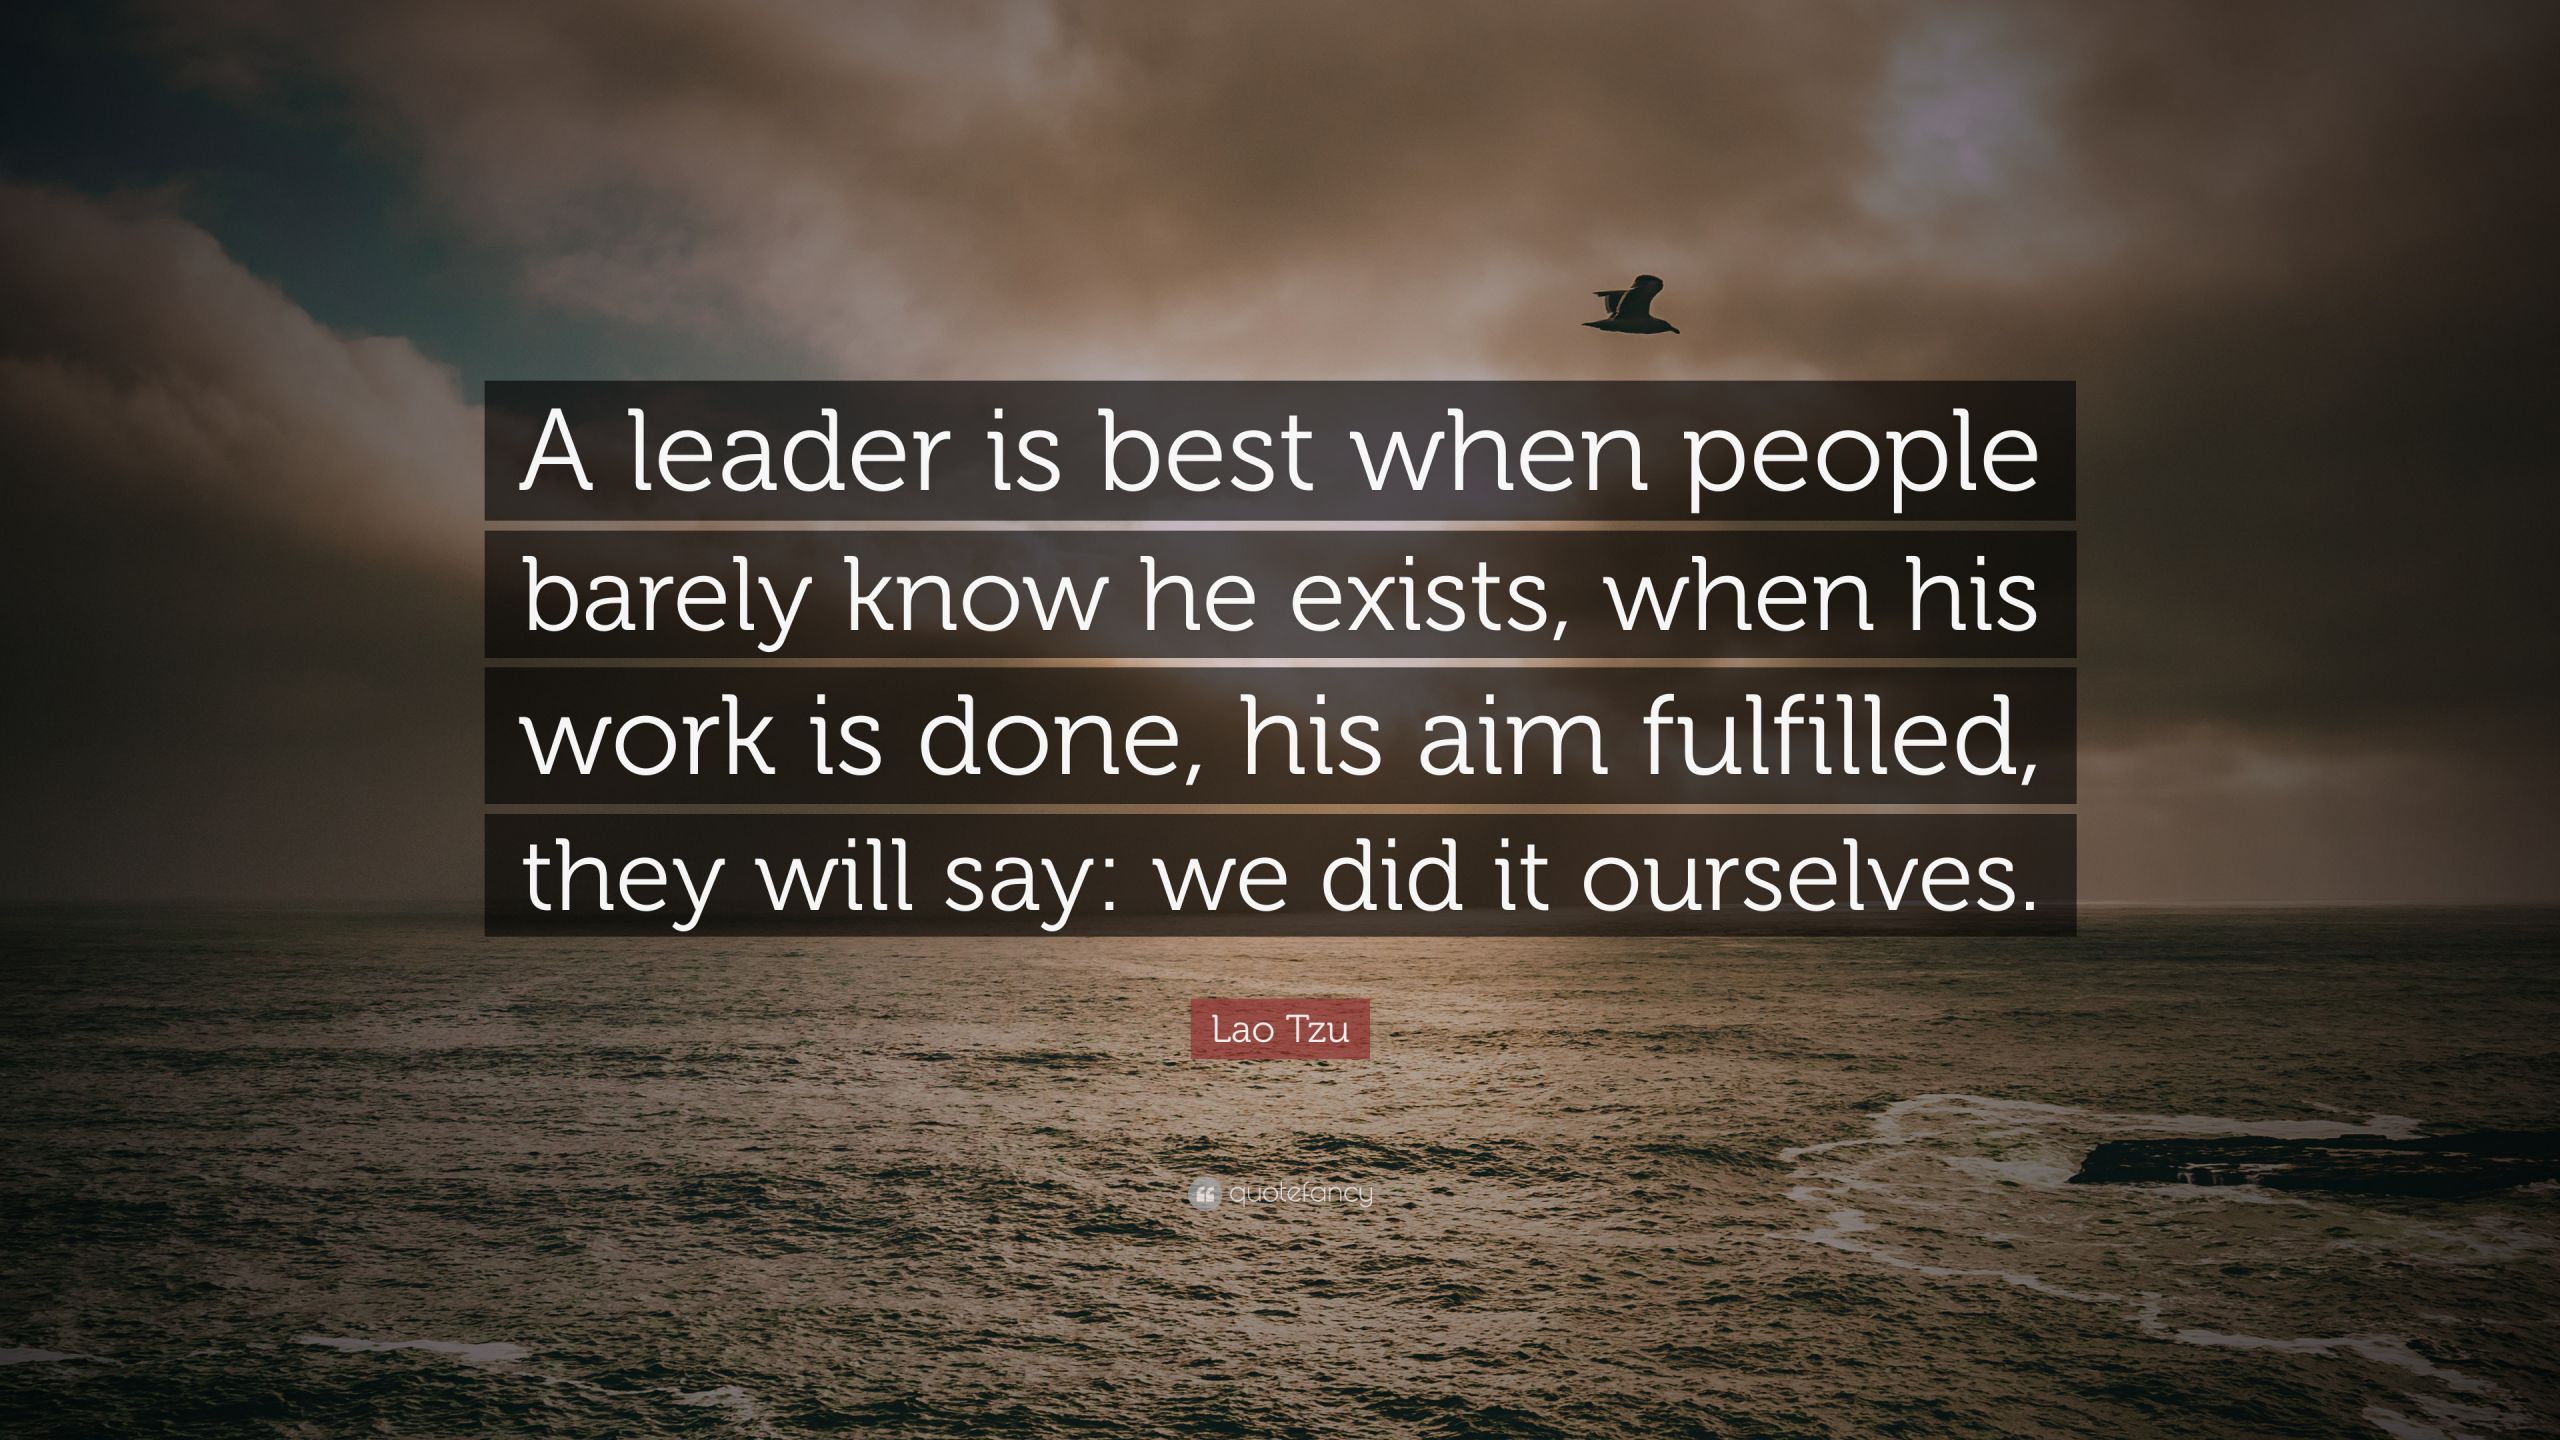 Lao Tzu Quotes Leadership
 Lao Tzu Quote “A leader is best when people barely know